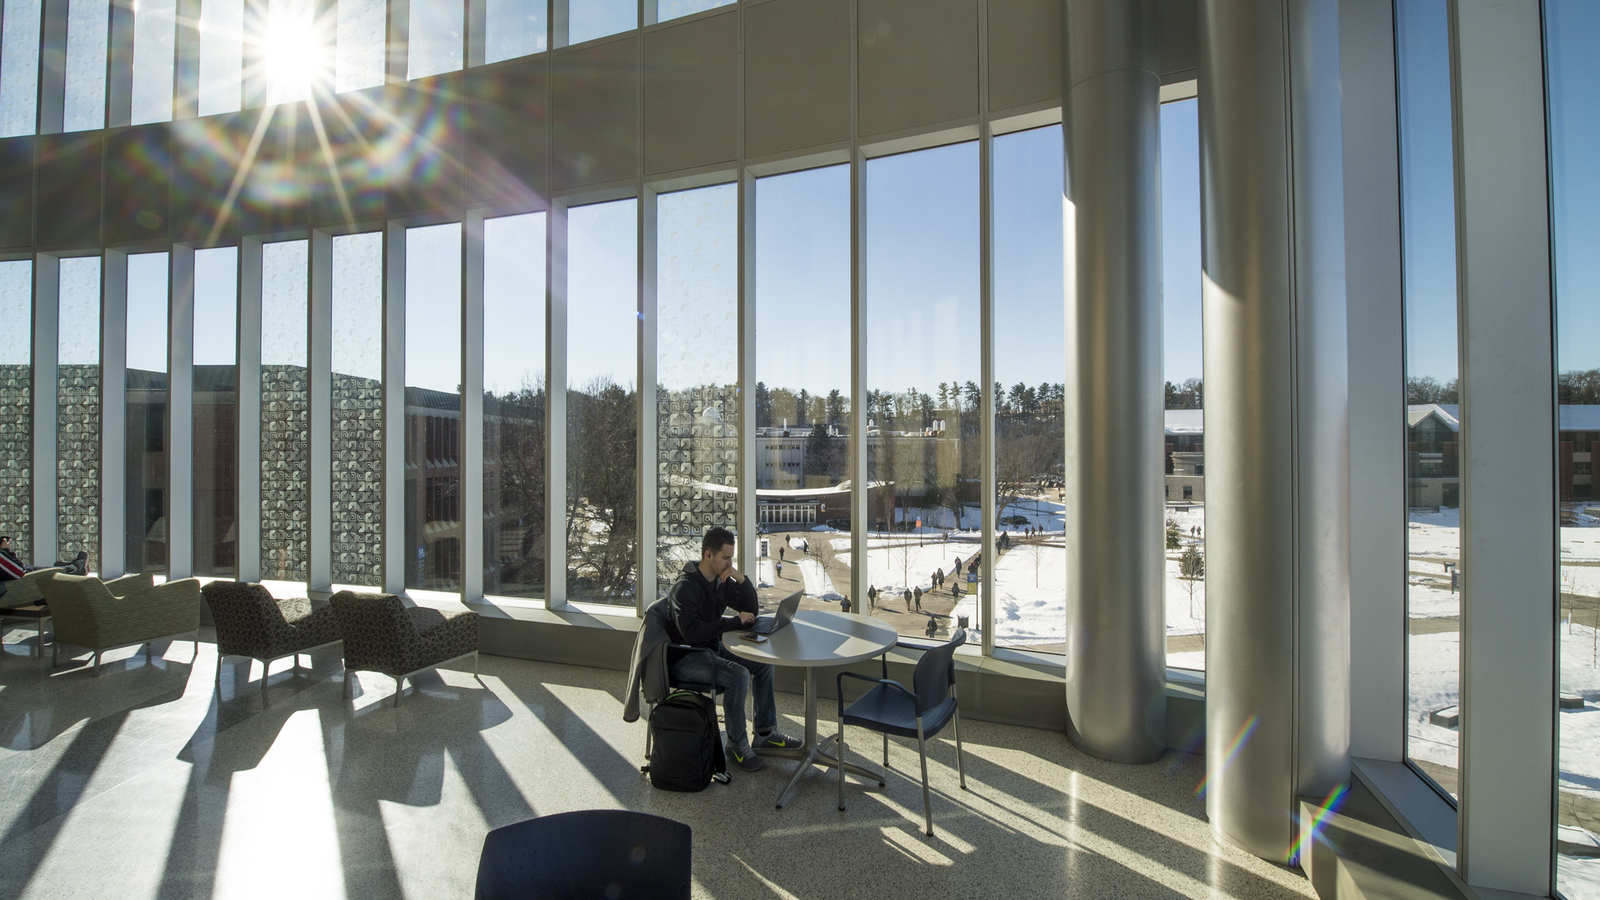 Student studying in sunny windows of Centennial Hall during winter